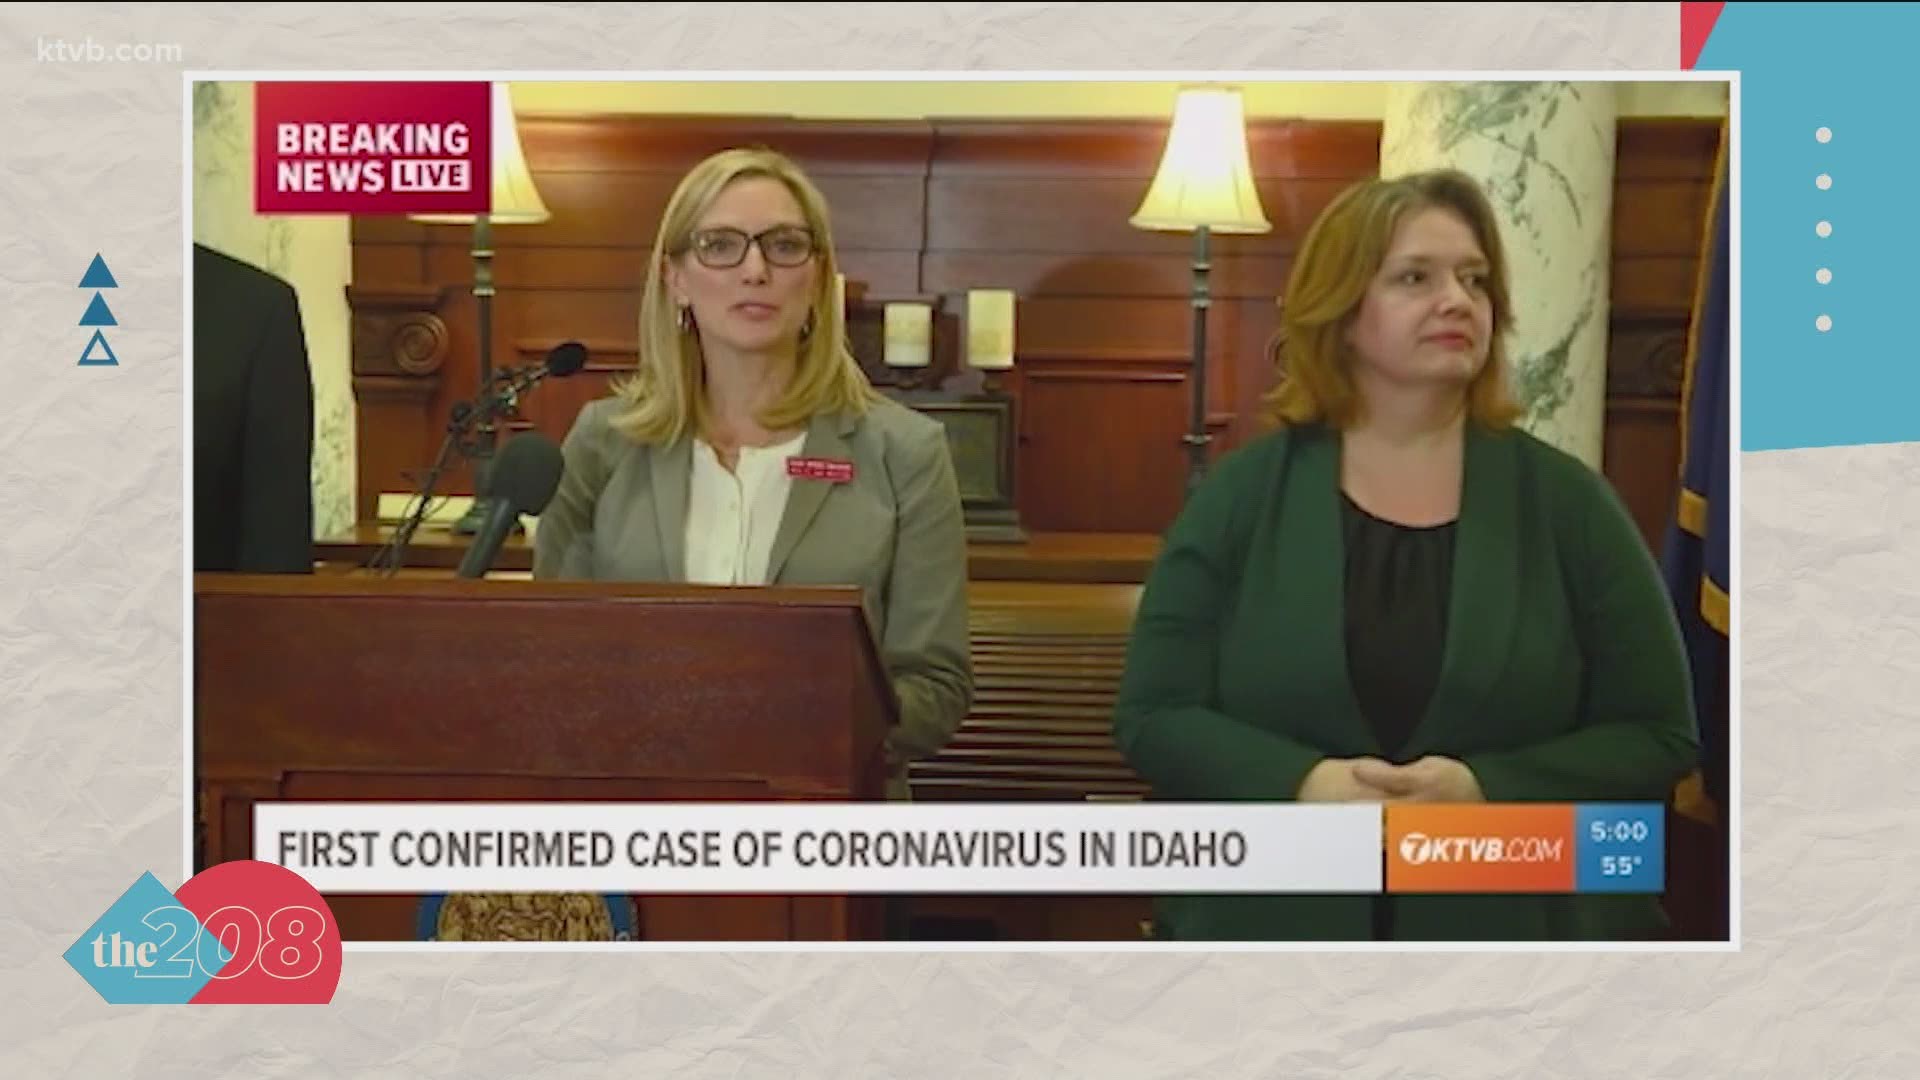 It was one year ago March 13th that Gov. Brad Little announced Idaho had it's first lab-confirmed case of COVID-19. Life hasn't been the same since then.